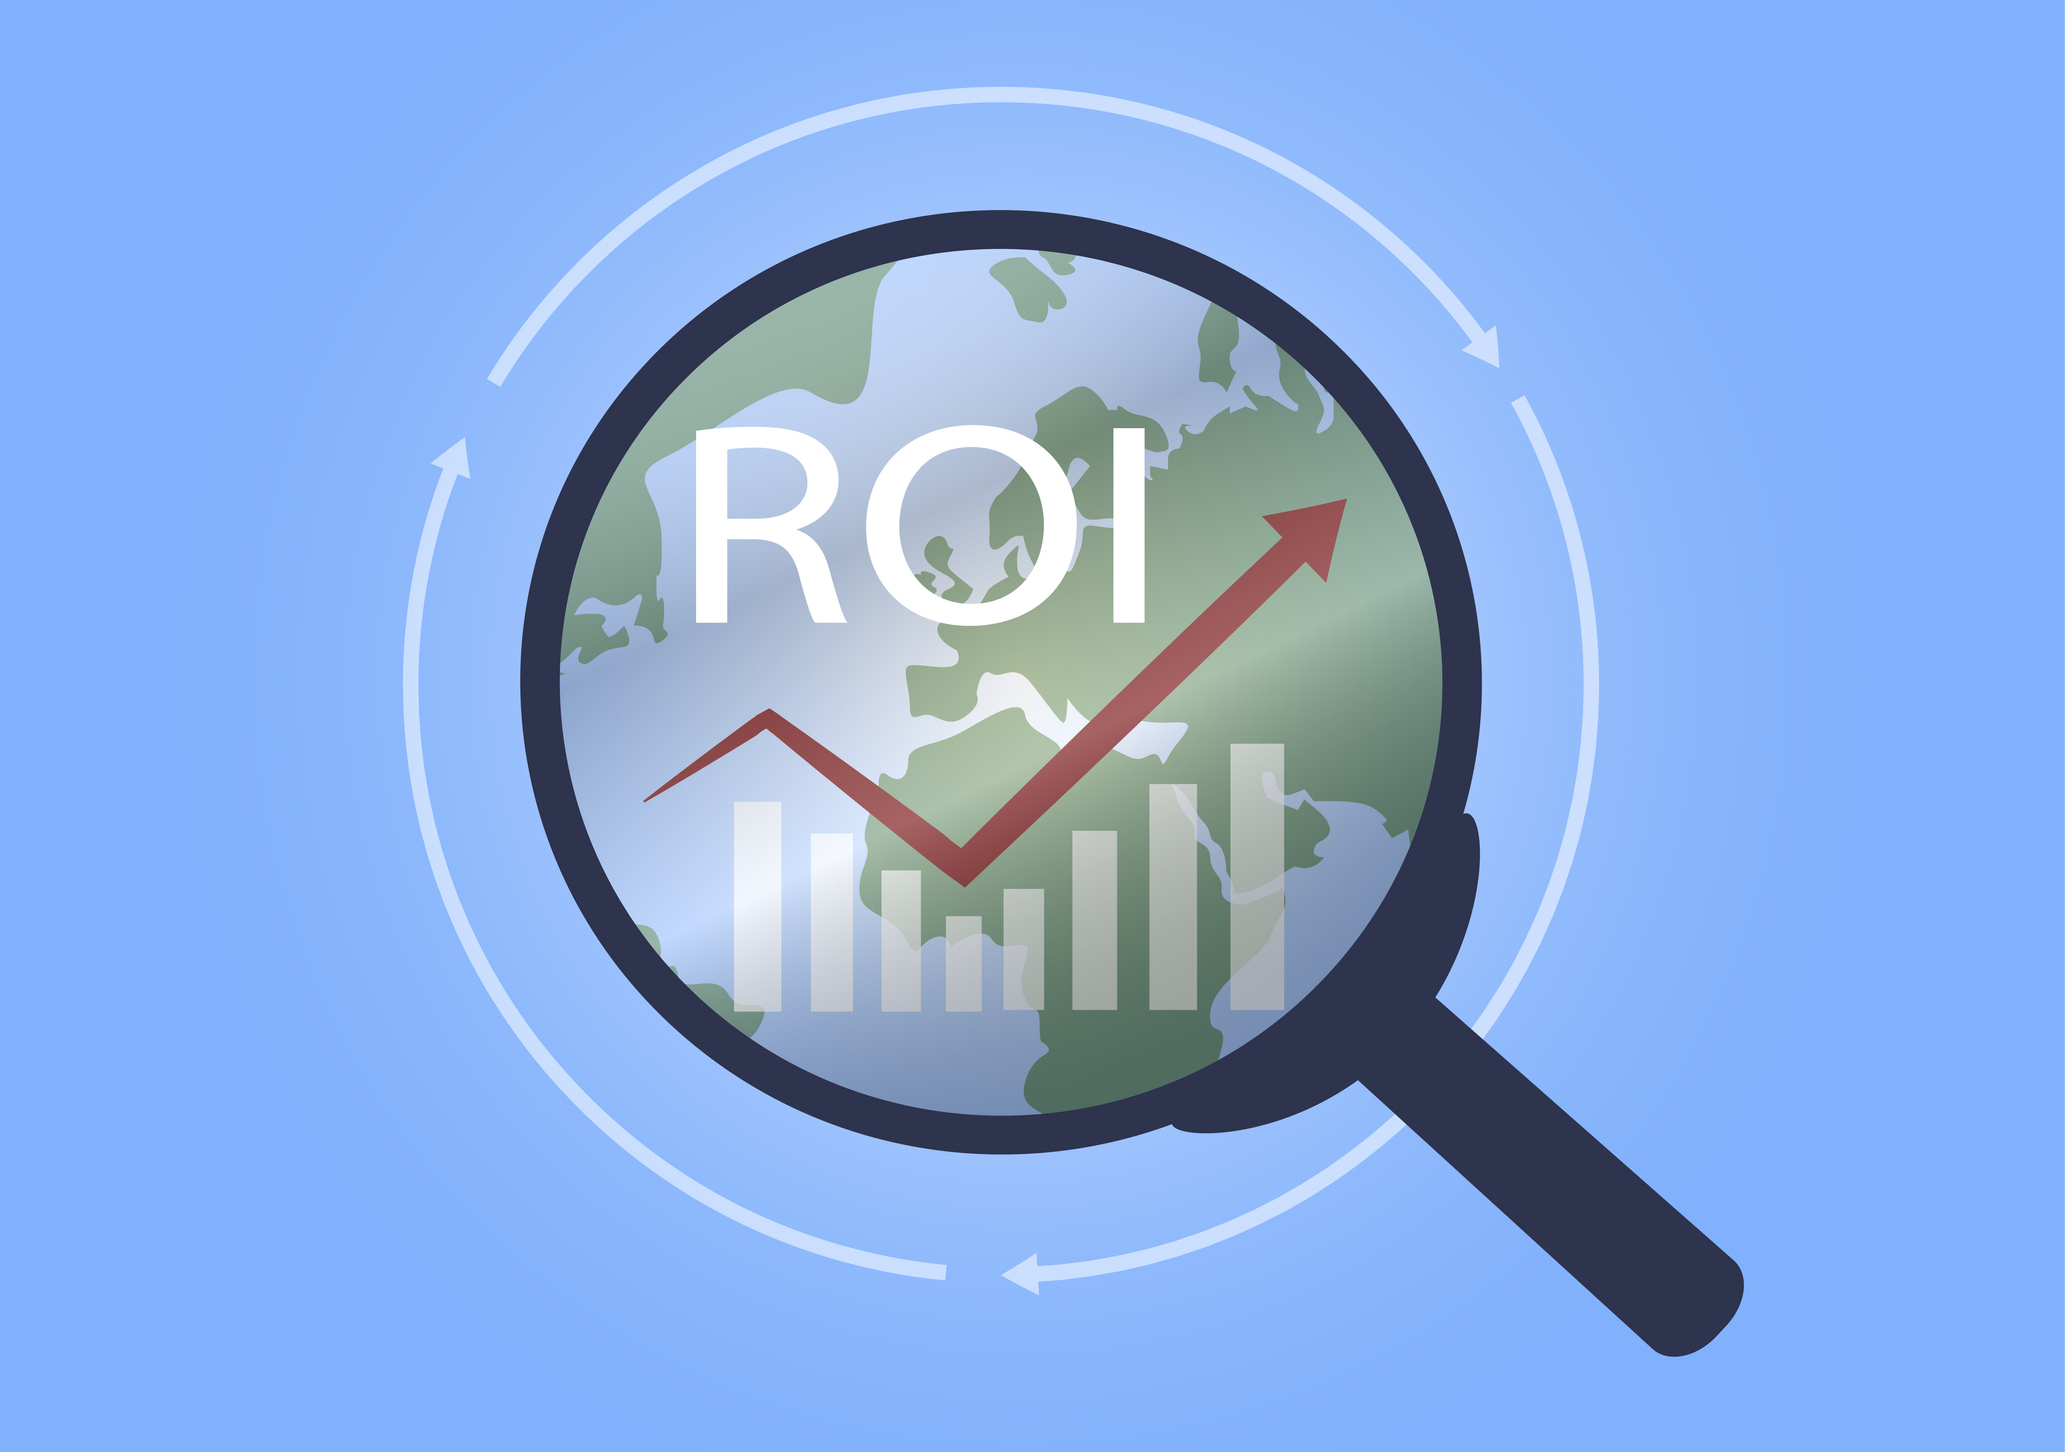 Magnifying glass over the planet with the letters “ROI” and graph over it.